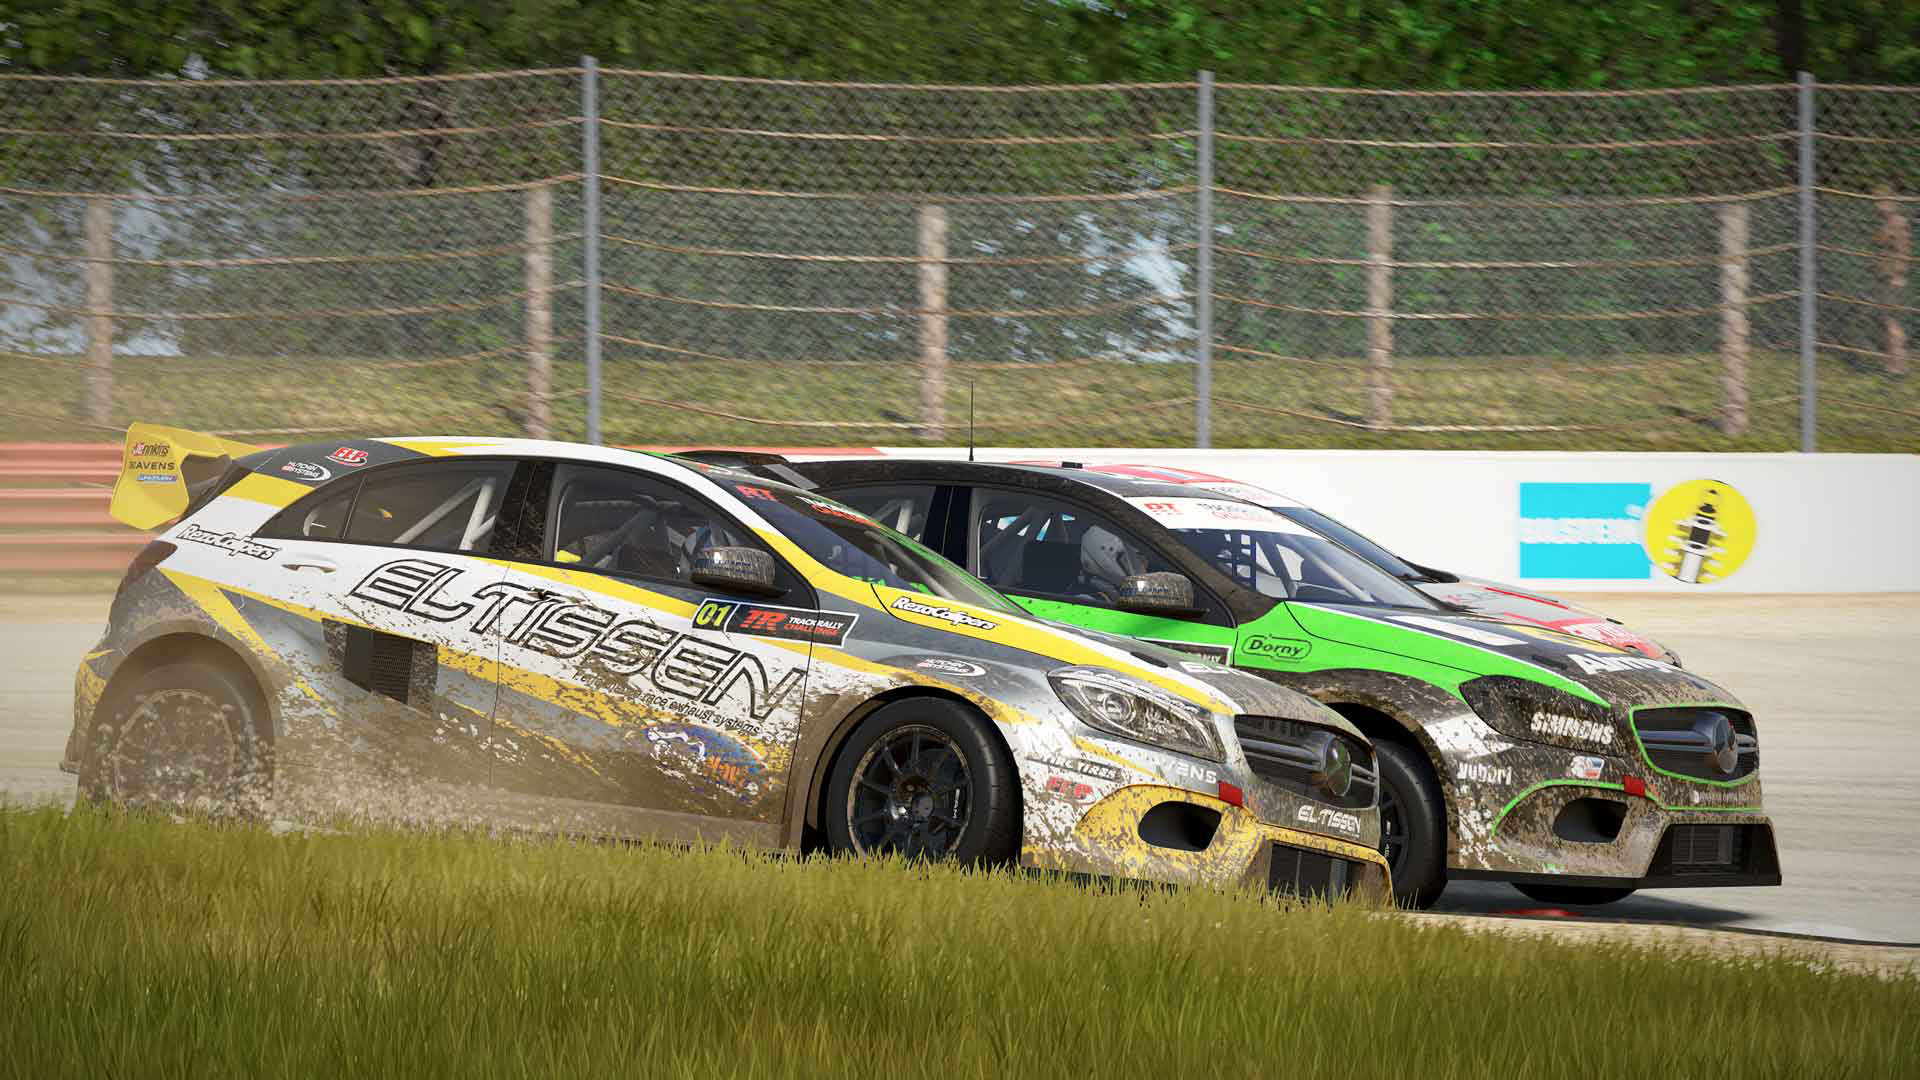 Project CARS 2 on Steam